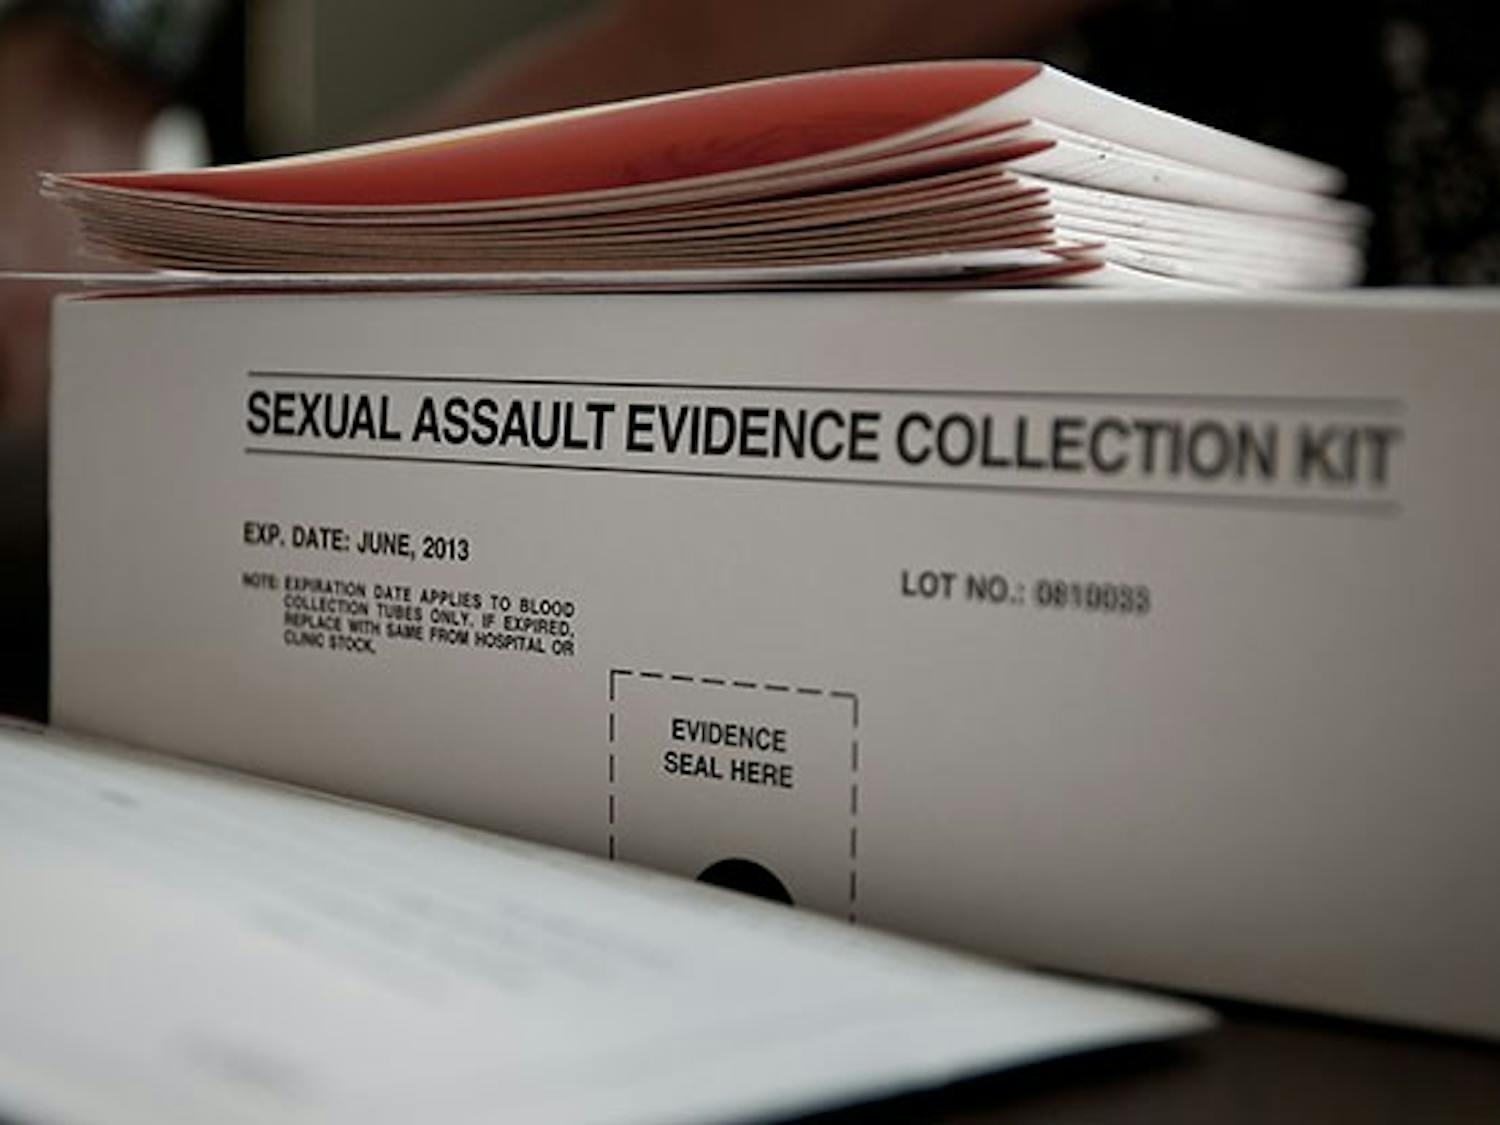 When a victim visits a hospital after&nbsp;being sexually assaulted, oftentimes a sexual assault kit, also known as a rape kit, is created. The kit includes DNA evidence and evidence from the crime scene.&nbsp;